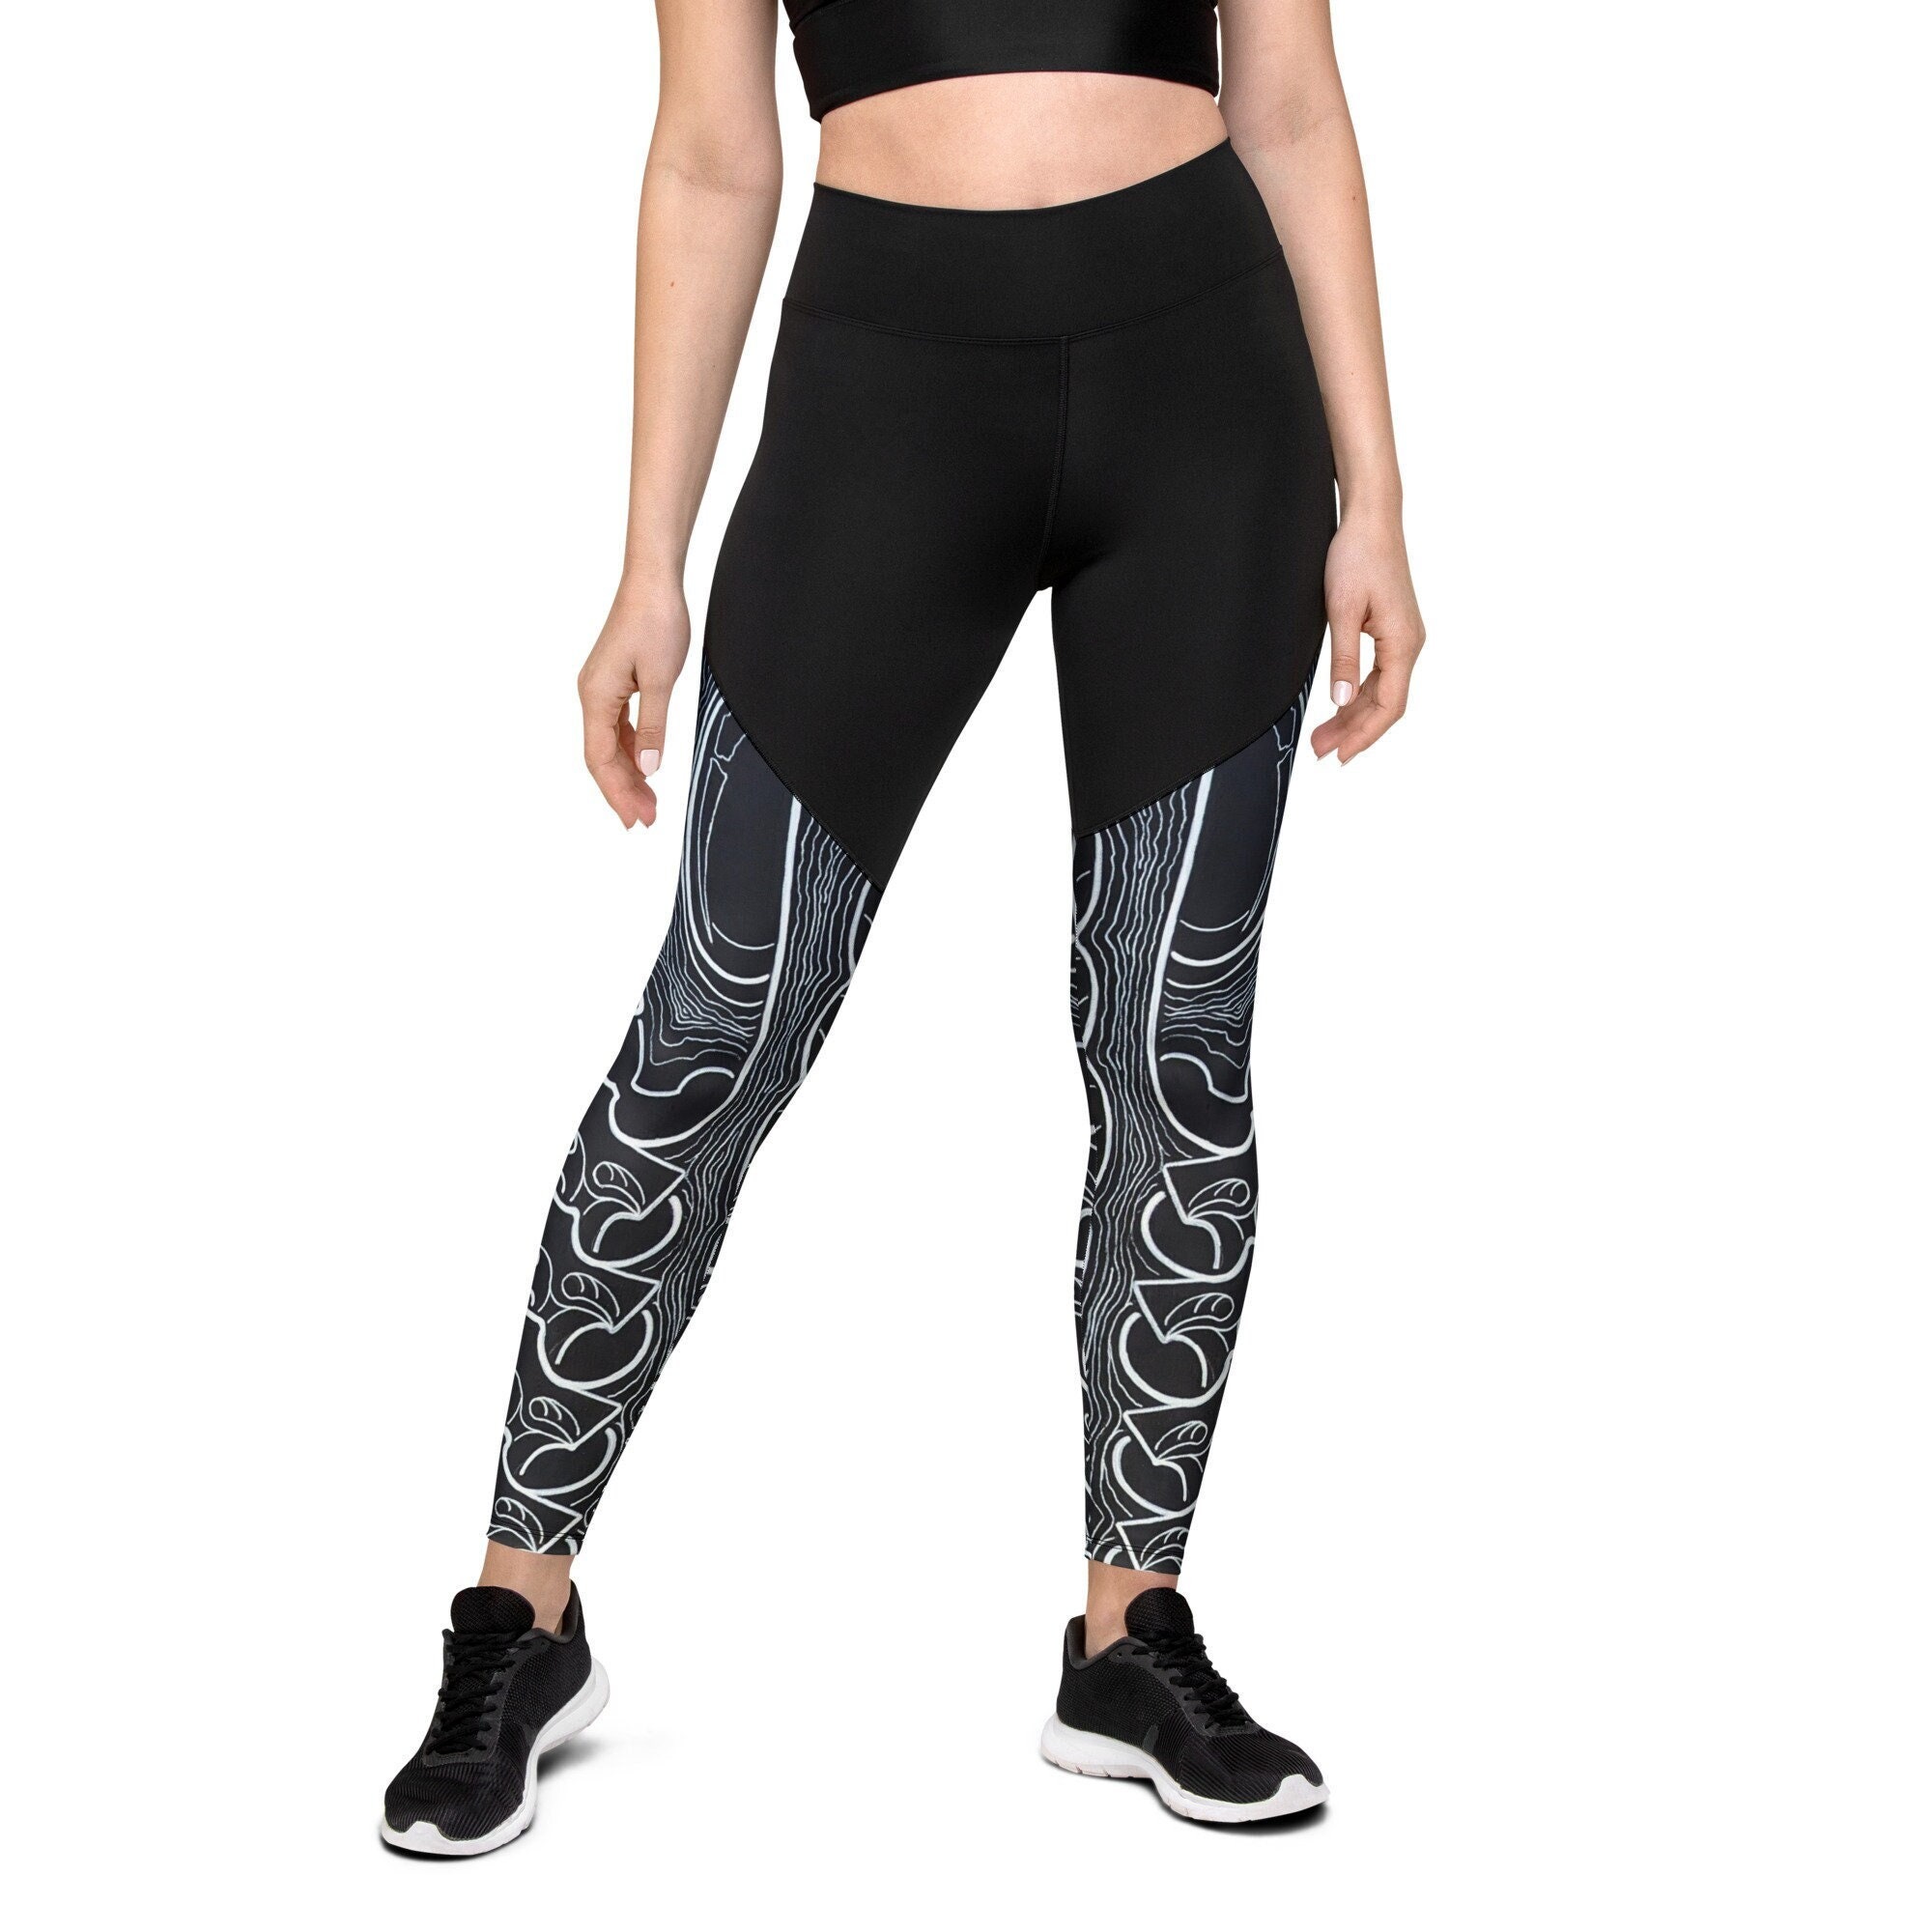 WOMEN'S 3 D PRINTED GALAXY ALIEN CAT GOTHIC PARTY LEGGINGS FITNESS